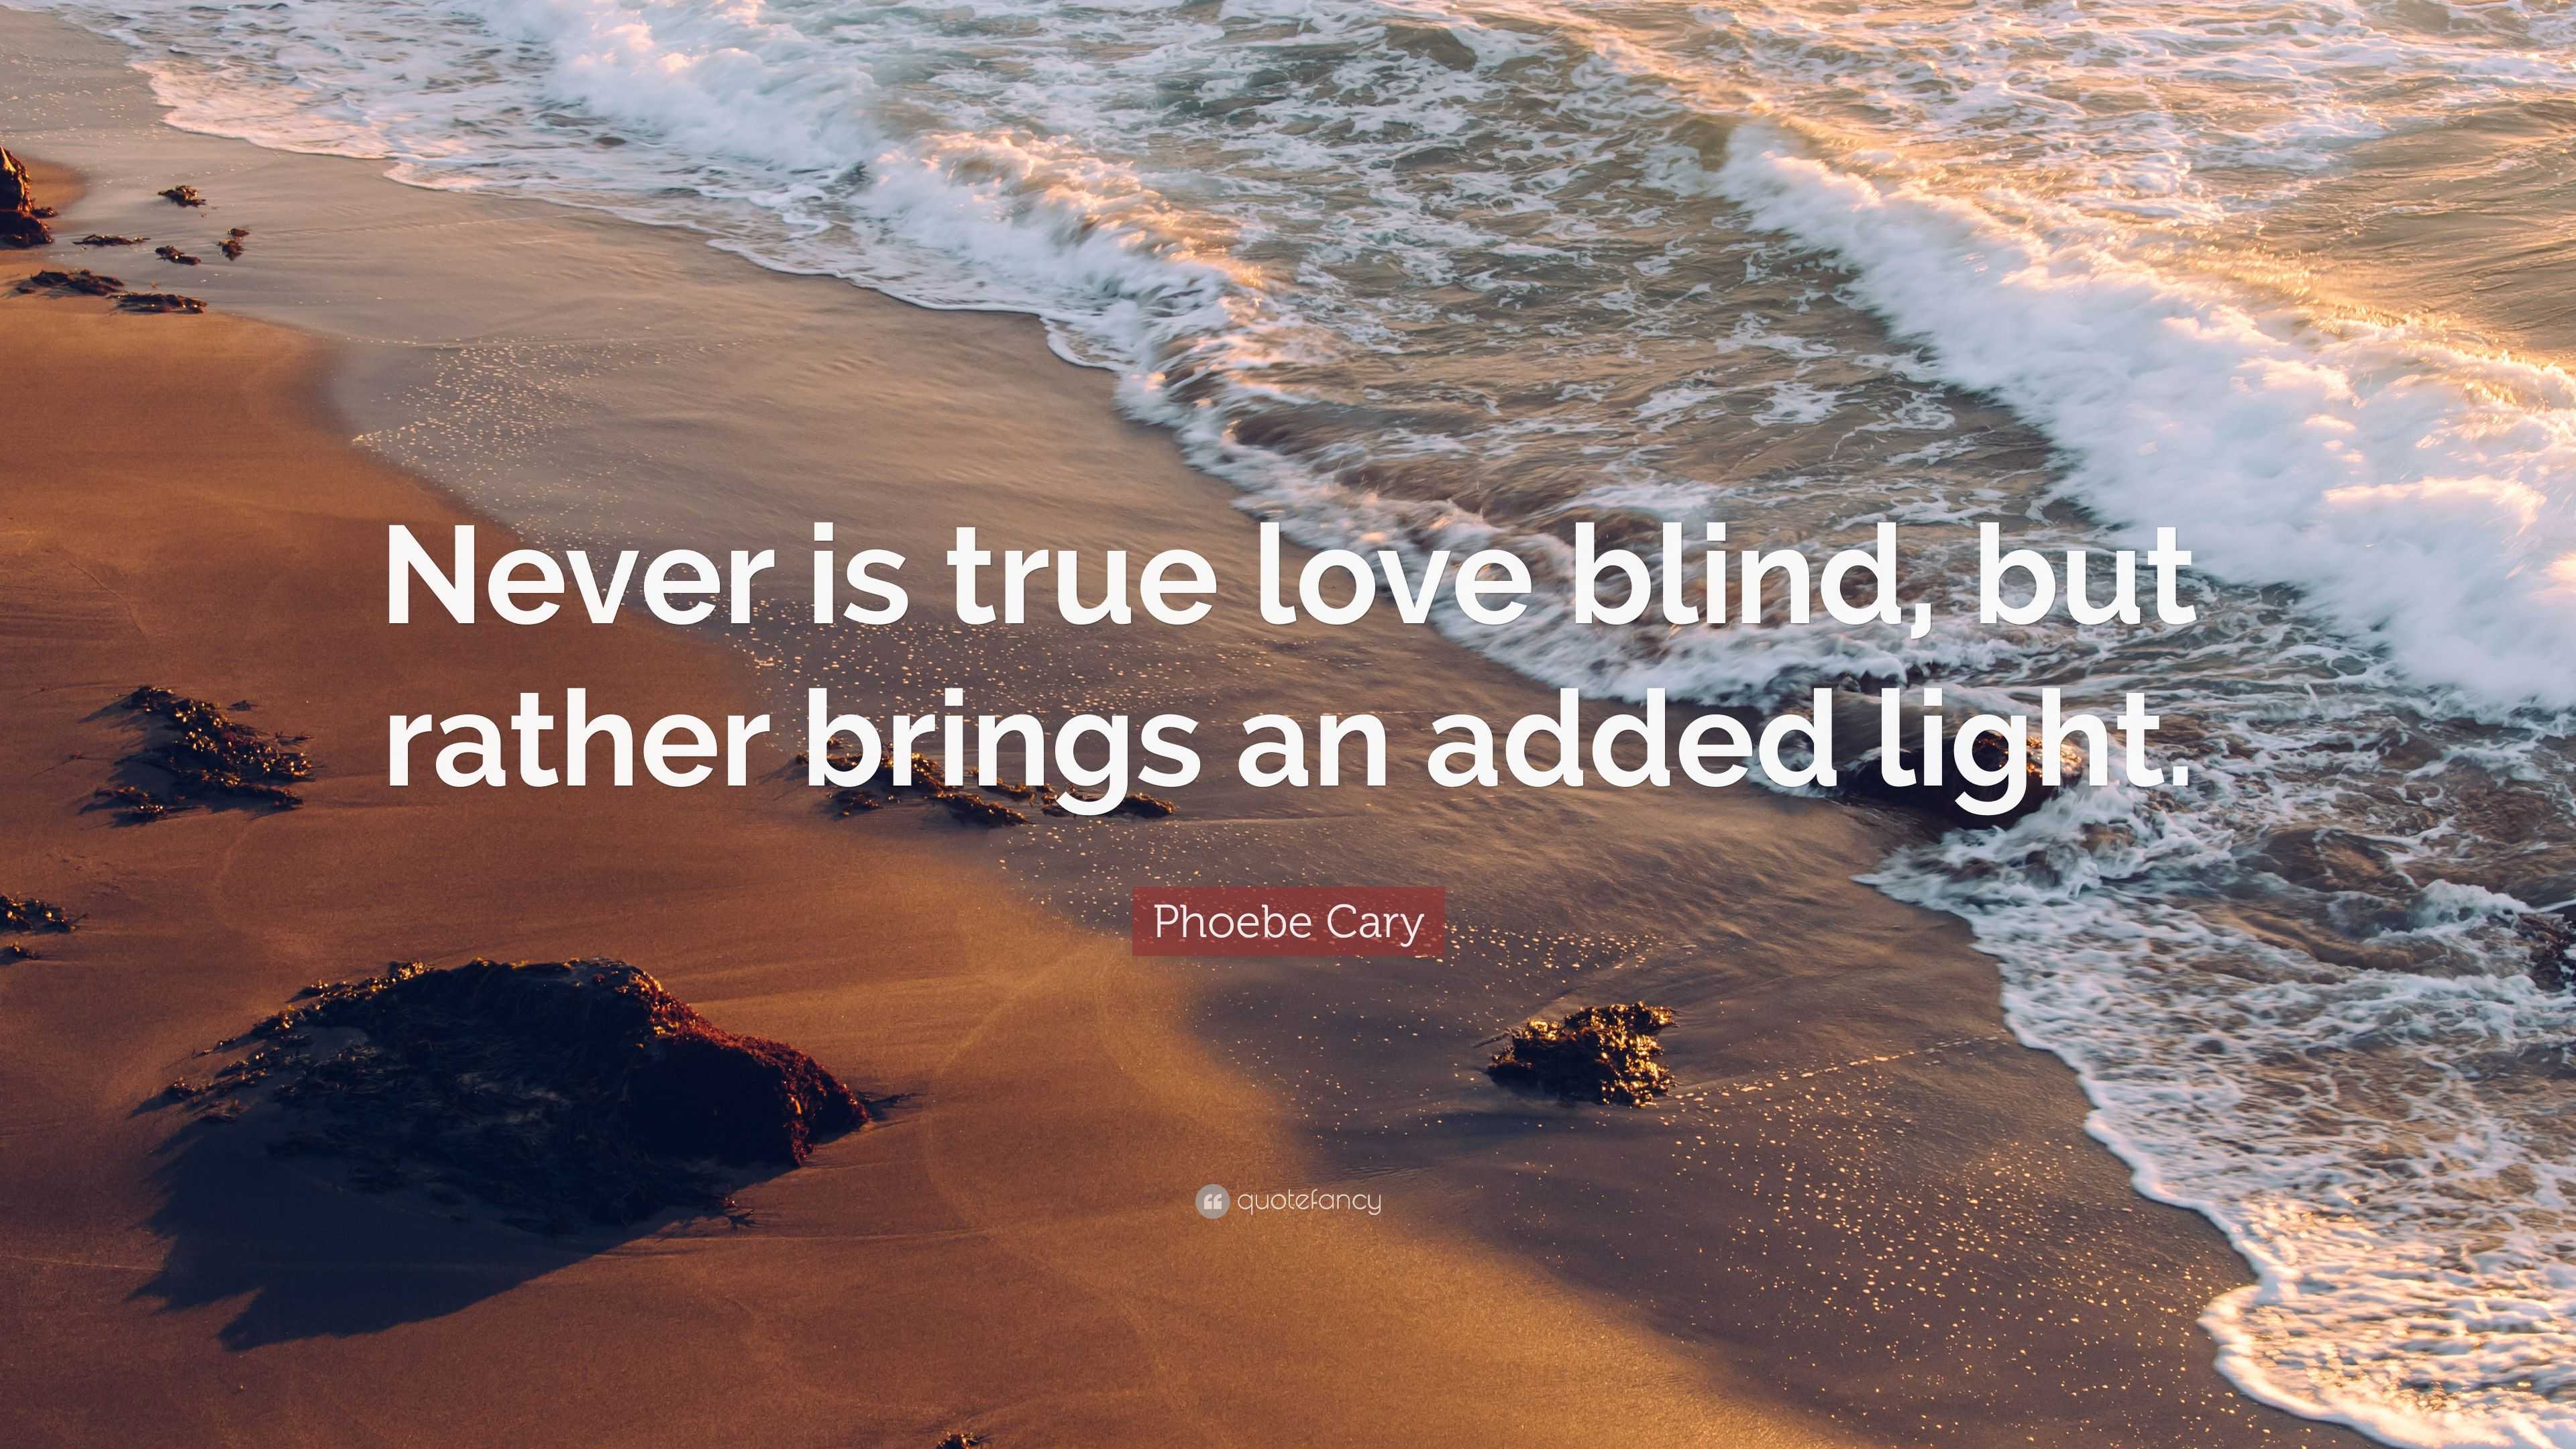 download true love is blind meaning